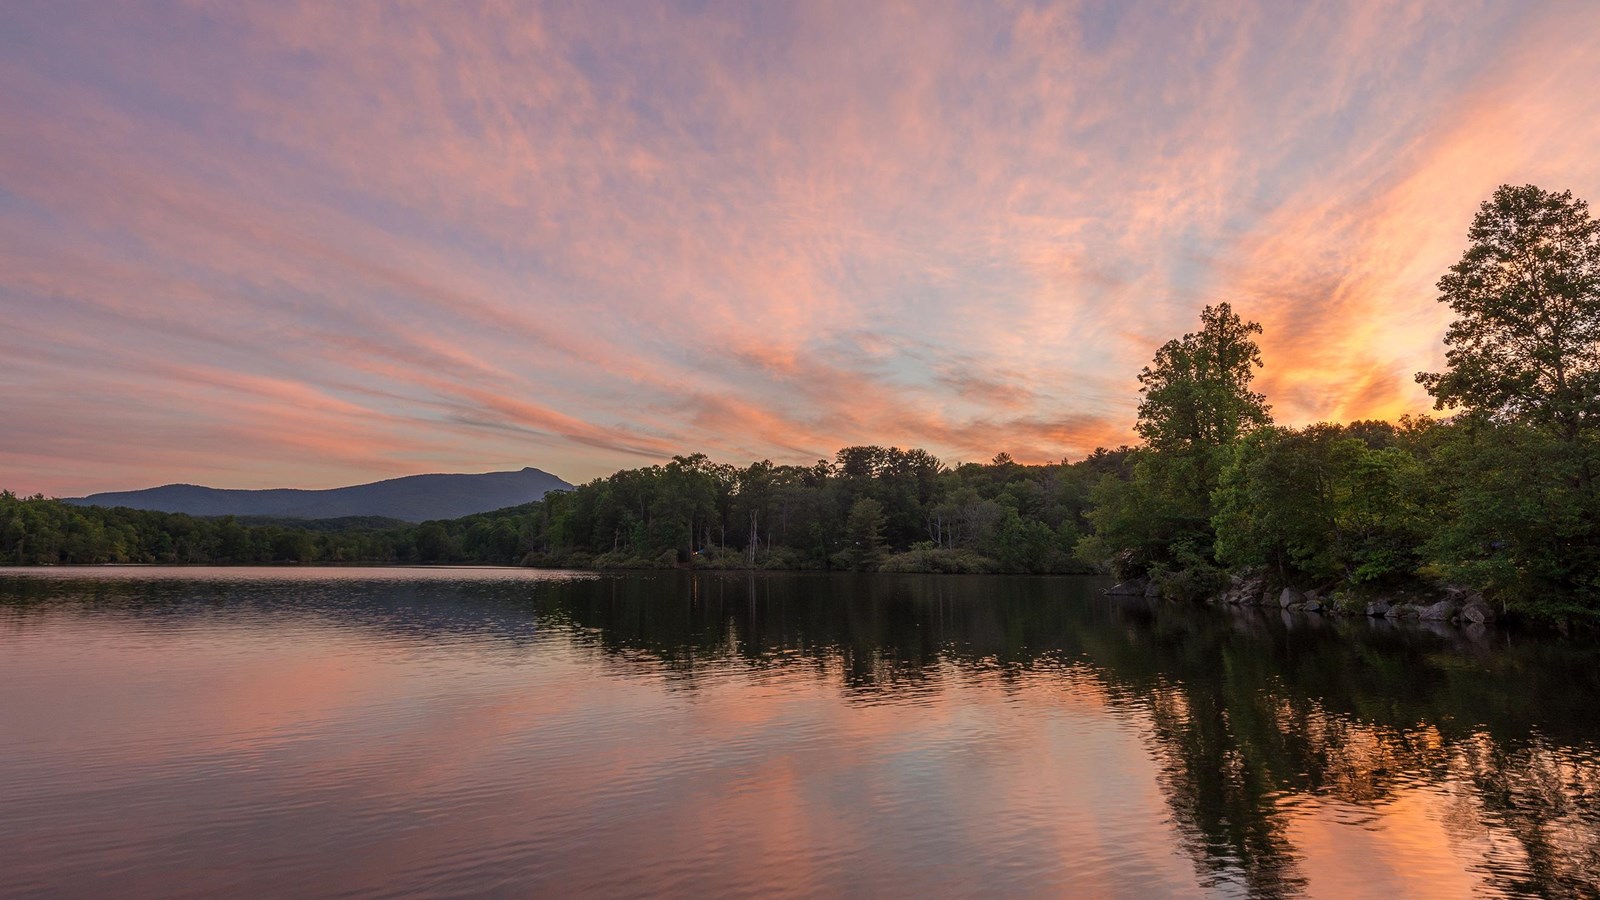 Pink sunset clouds are reflected in a quiet lake that is surrounded by dense, green forests